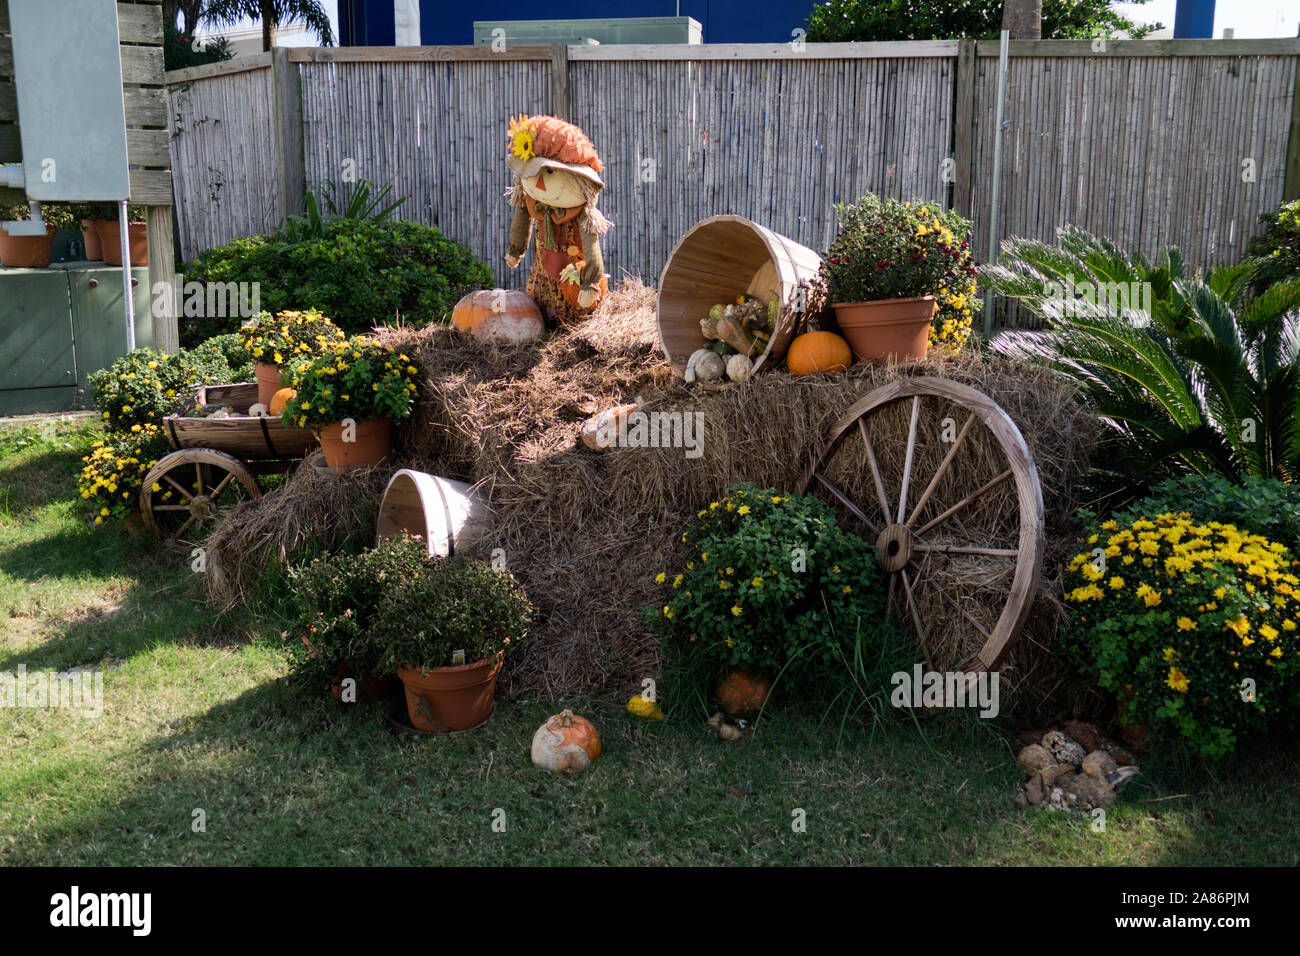 Halloween decorations at The Hangout in Gulf Shores, Alabama. Stock Photo